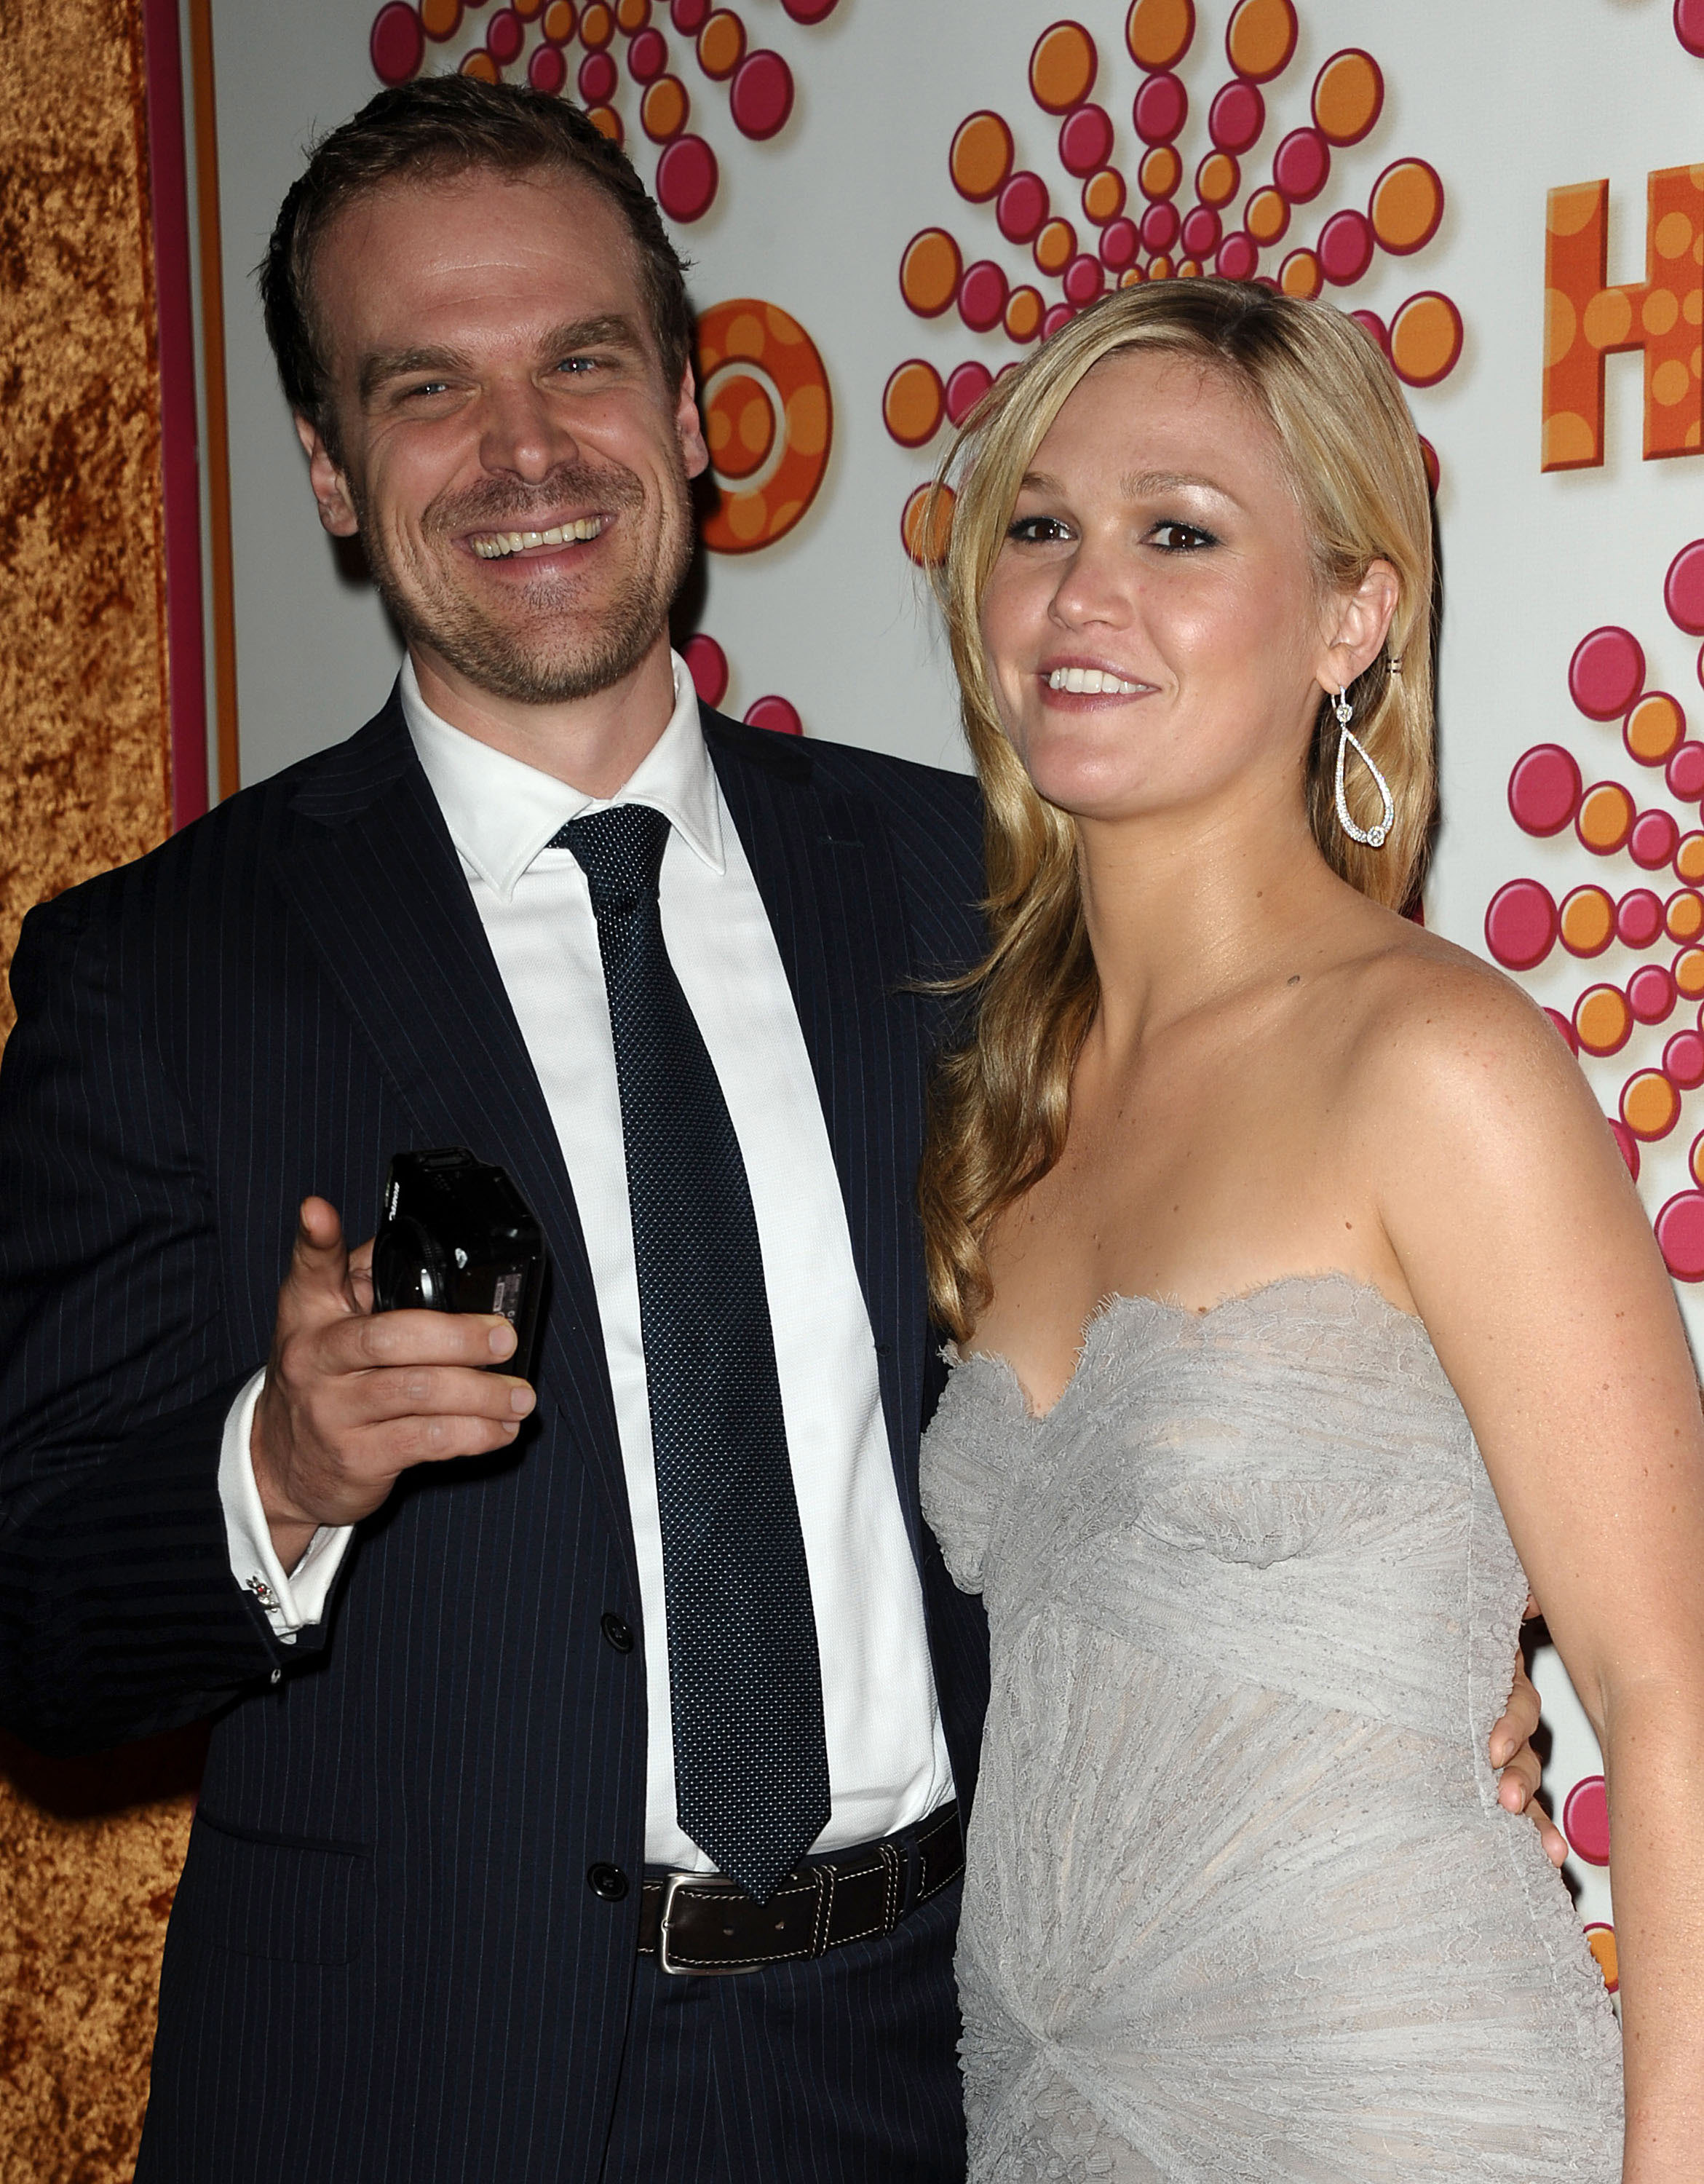 Actor David Harbour and actress Julia Stiles attend HBO's post Emmy party at Pacific Design Cente,r on September 18, 2011, in West Hollywood, California. | Source: Getty Images